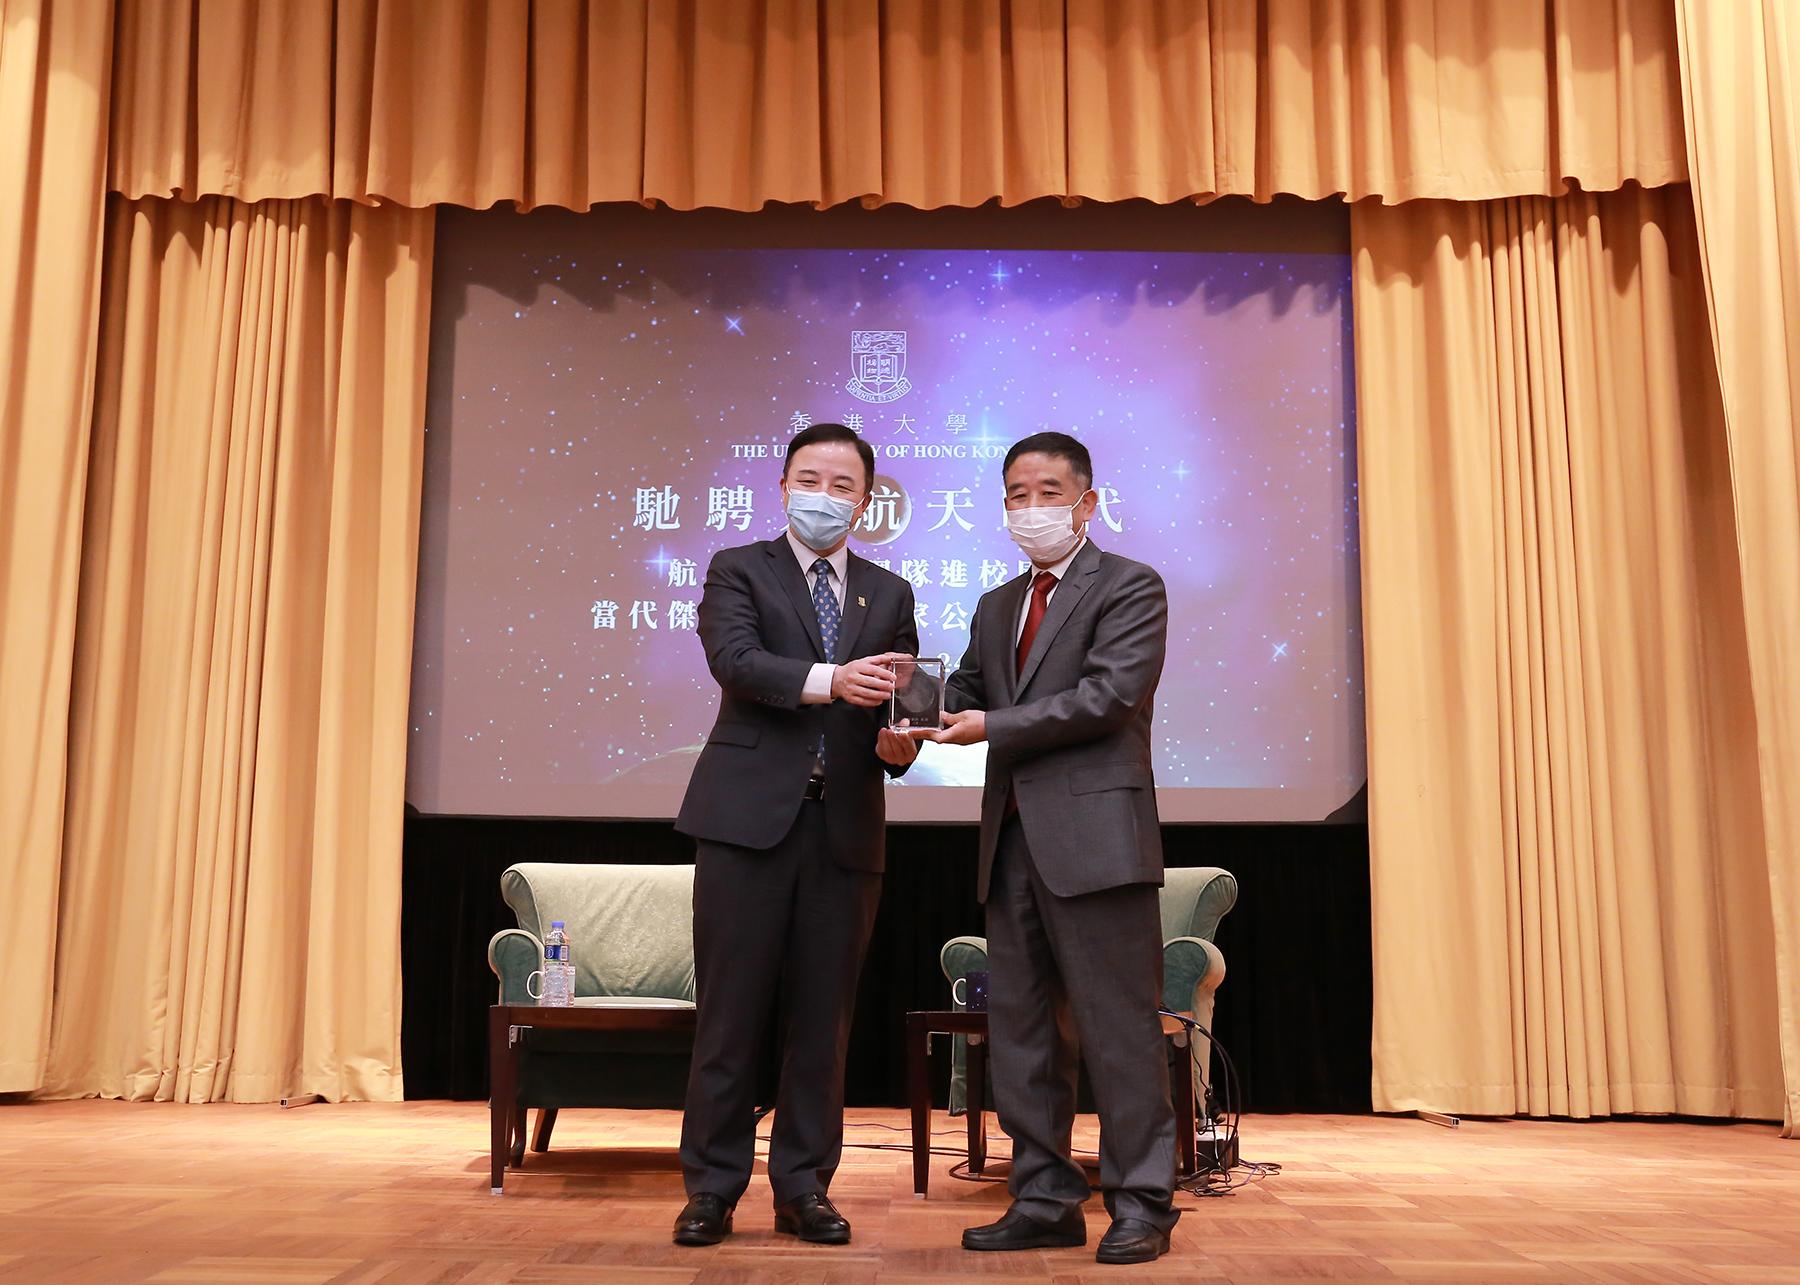 HKU President Professor Xiang Zhang and Mr Hu Hao, Chief Designer of the Third Stage of China's Lunar Exploration Programme